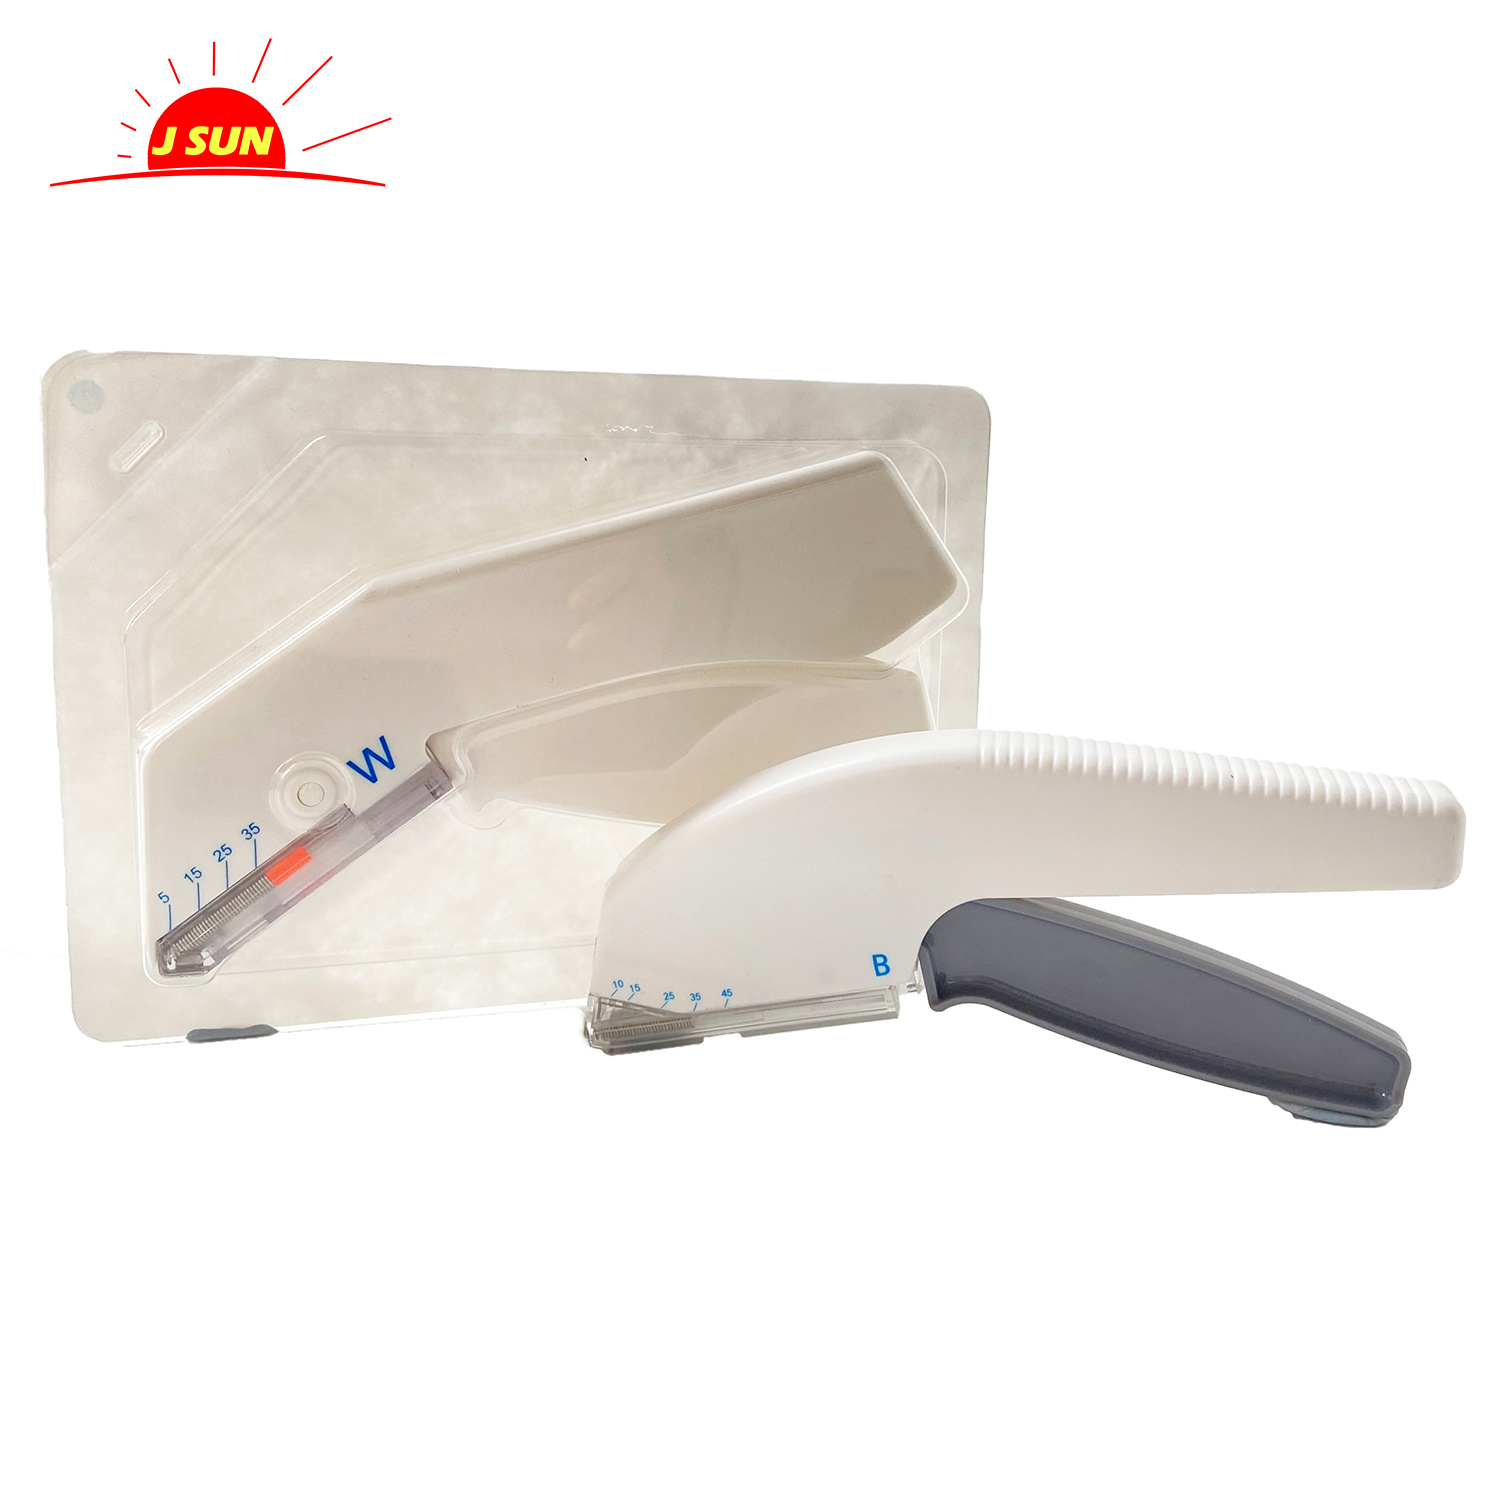 Best-selling product disposable Skin Stapler 35w for medical use